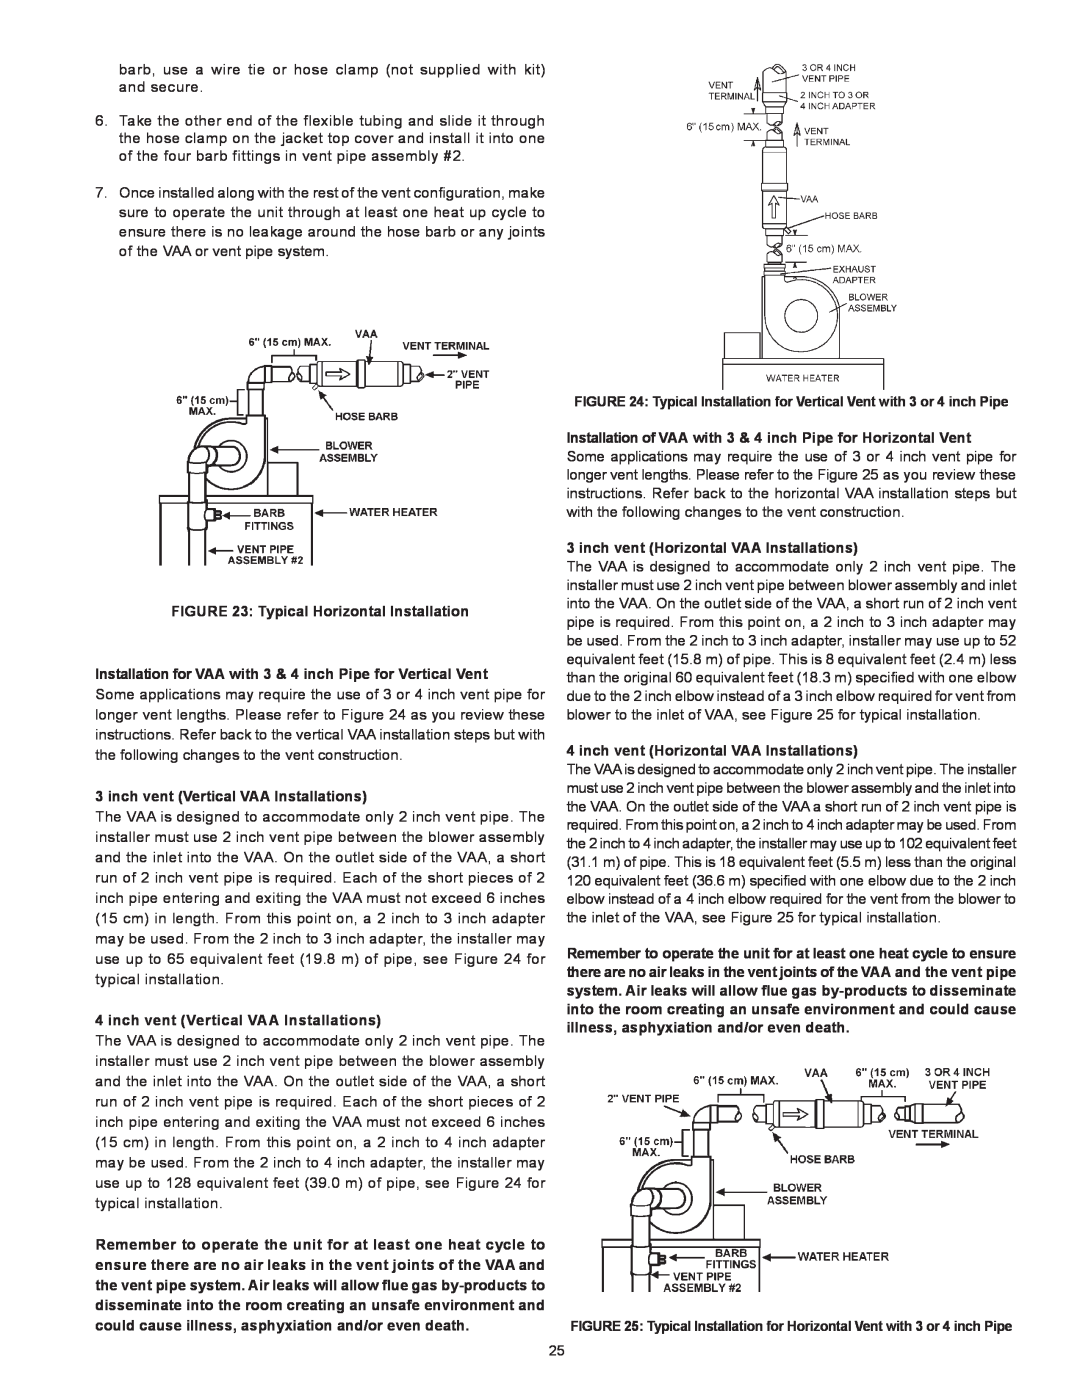 Reliance Water Heaters 317686-000 instruction manual Typical Horizontal Installation, inch vent Vertical VAA Installations 